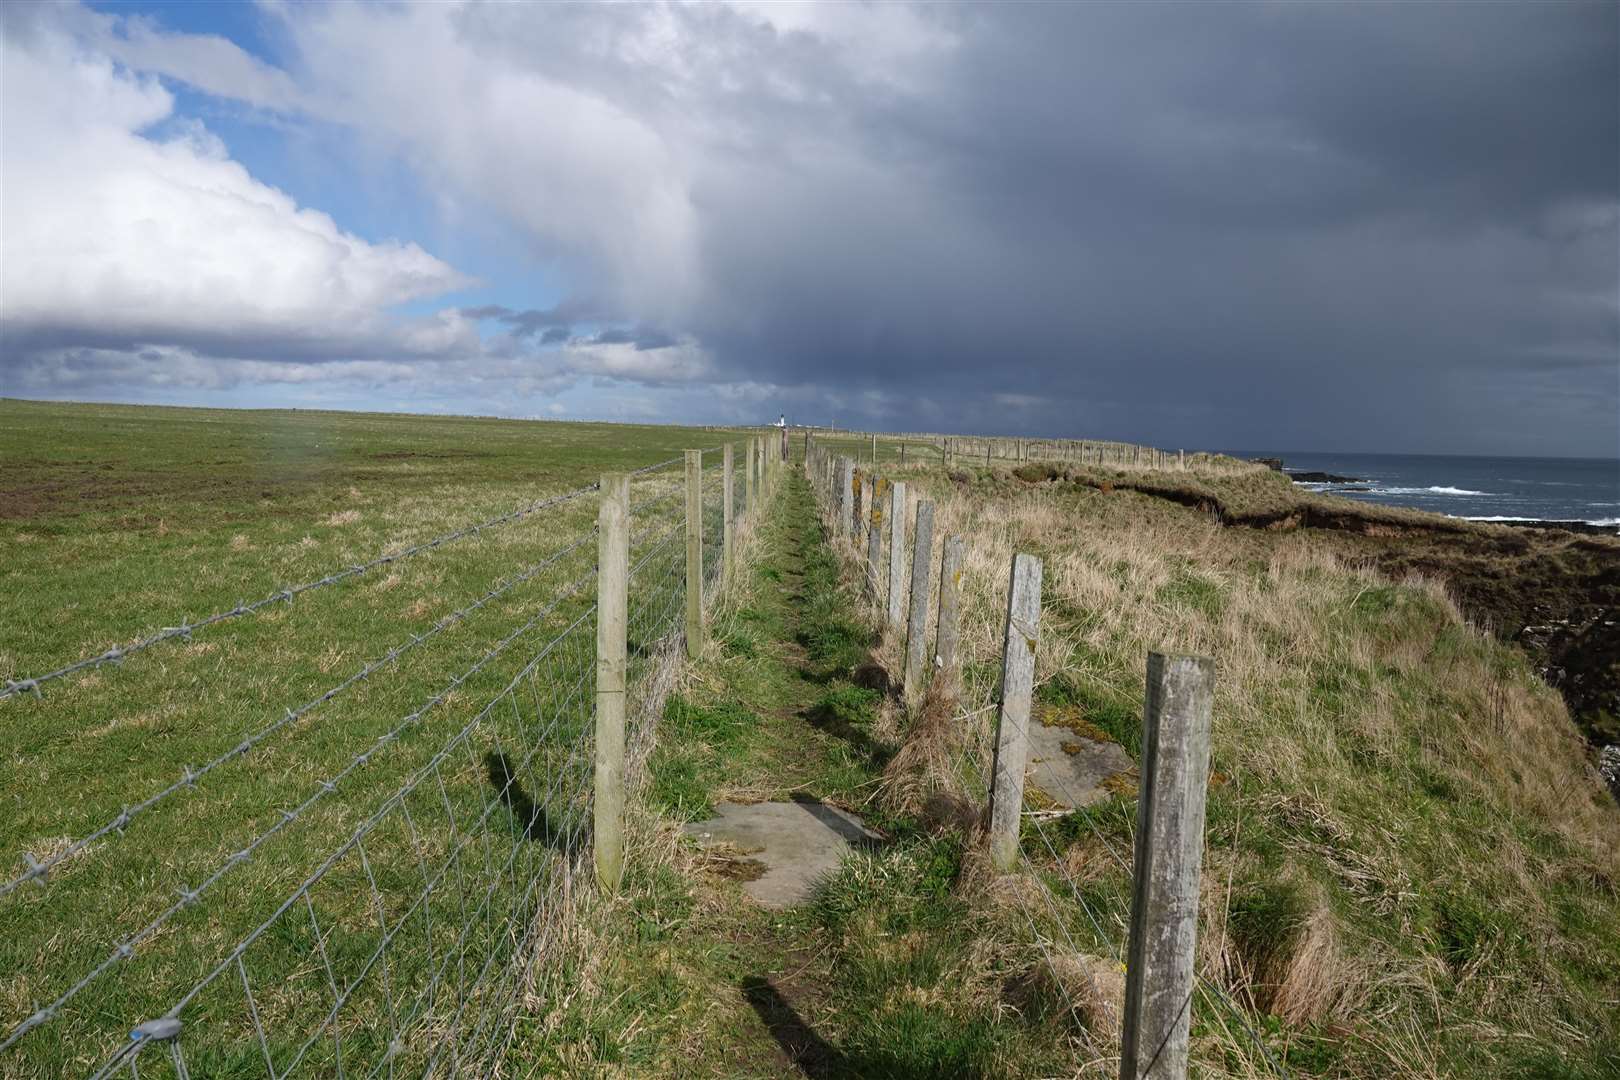 Derek Bremner sent this photograph taken between Staxigoe and Noss on the John O'Groats Trail.